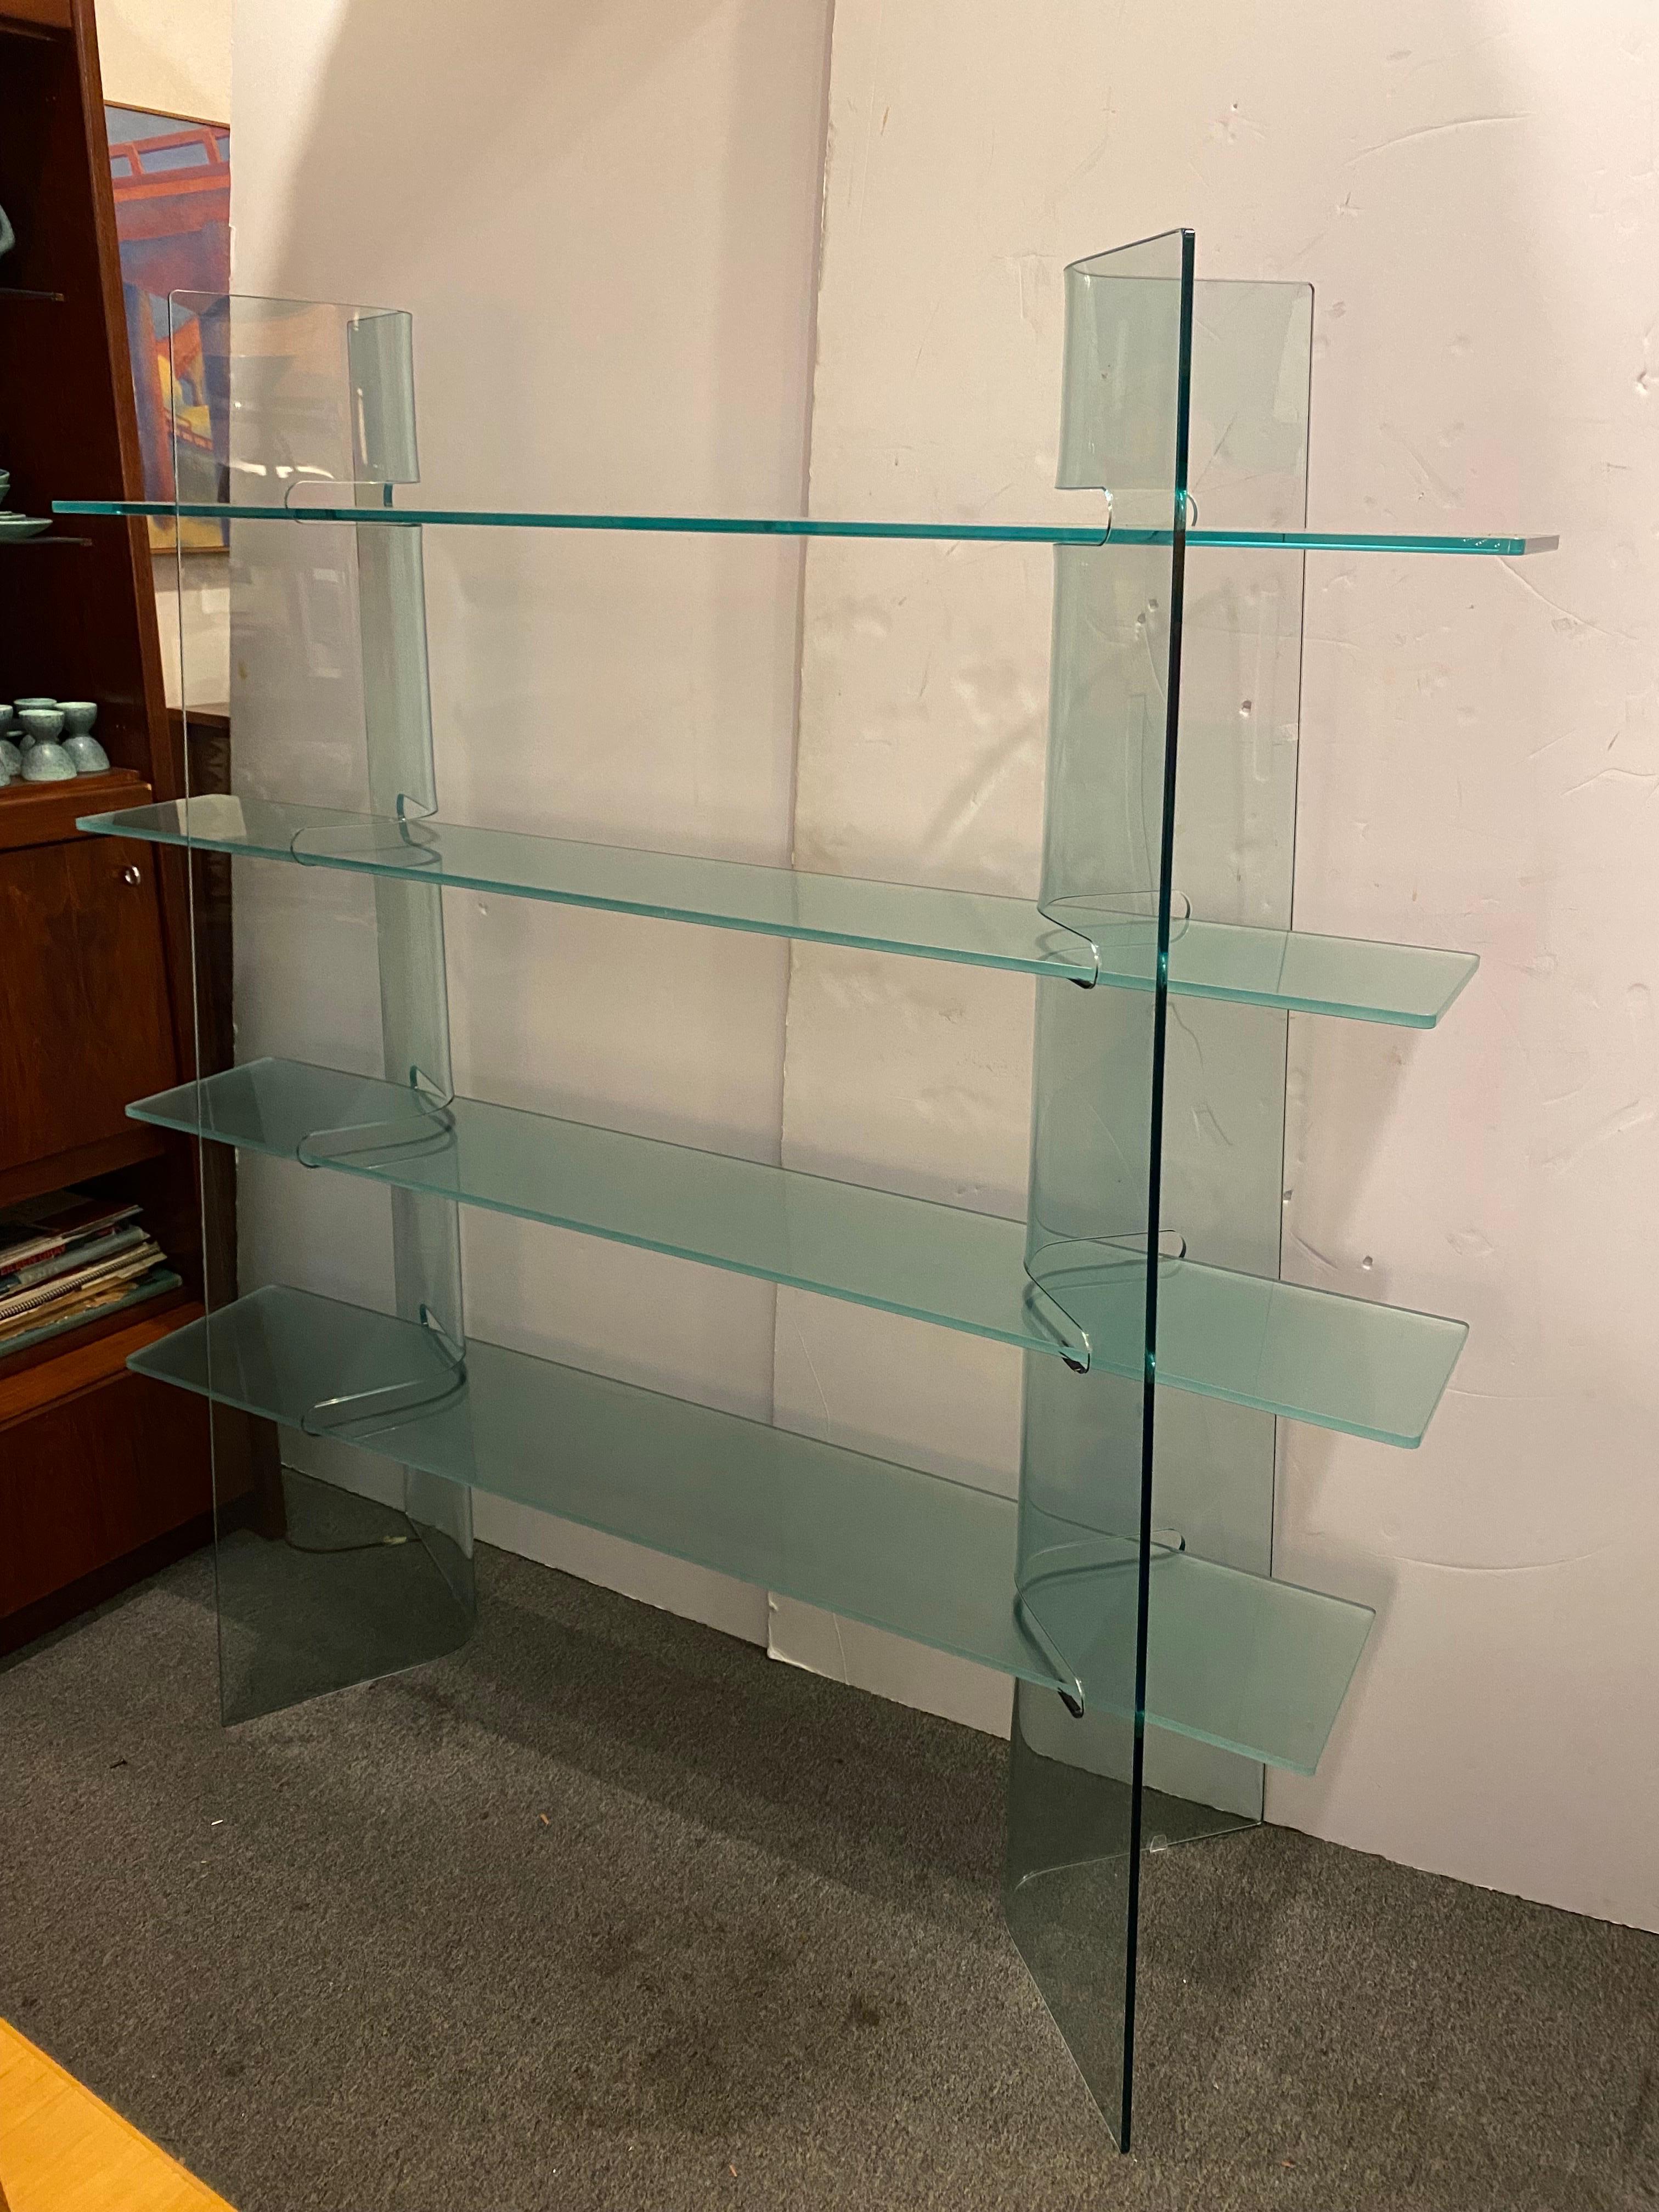 Tempered Glass Shelf.  4 glass shelves fit into the curved column cut-outs.  Very solid design that sits very well!  Columns can be adjusted a bit as to where they sit.  2 Lower shelves slightly deeper.
